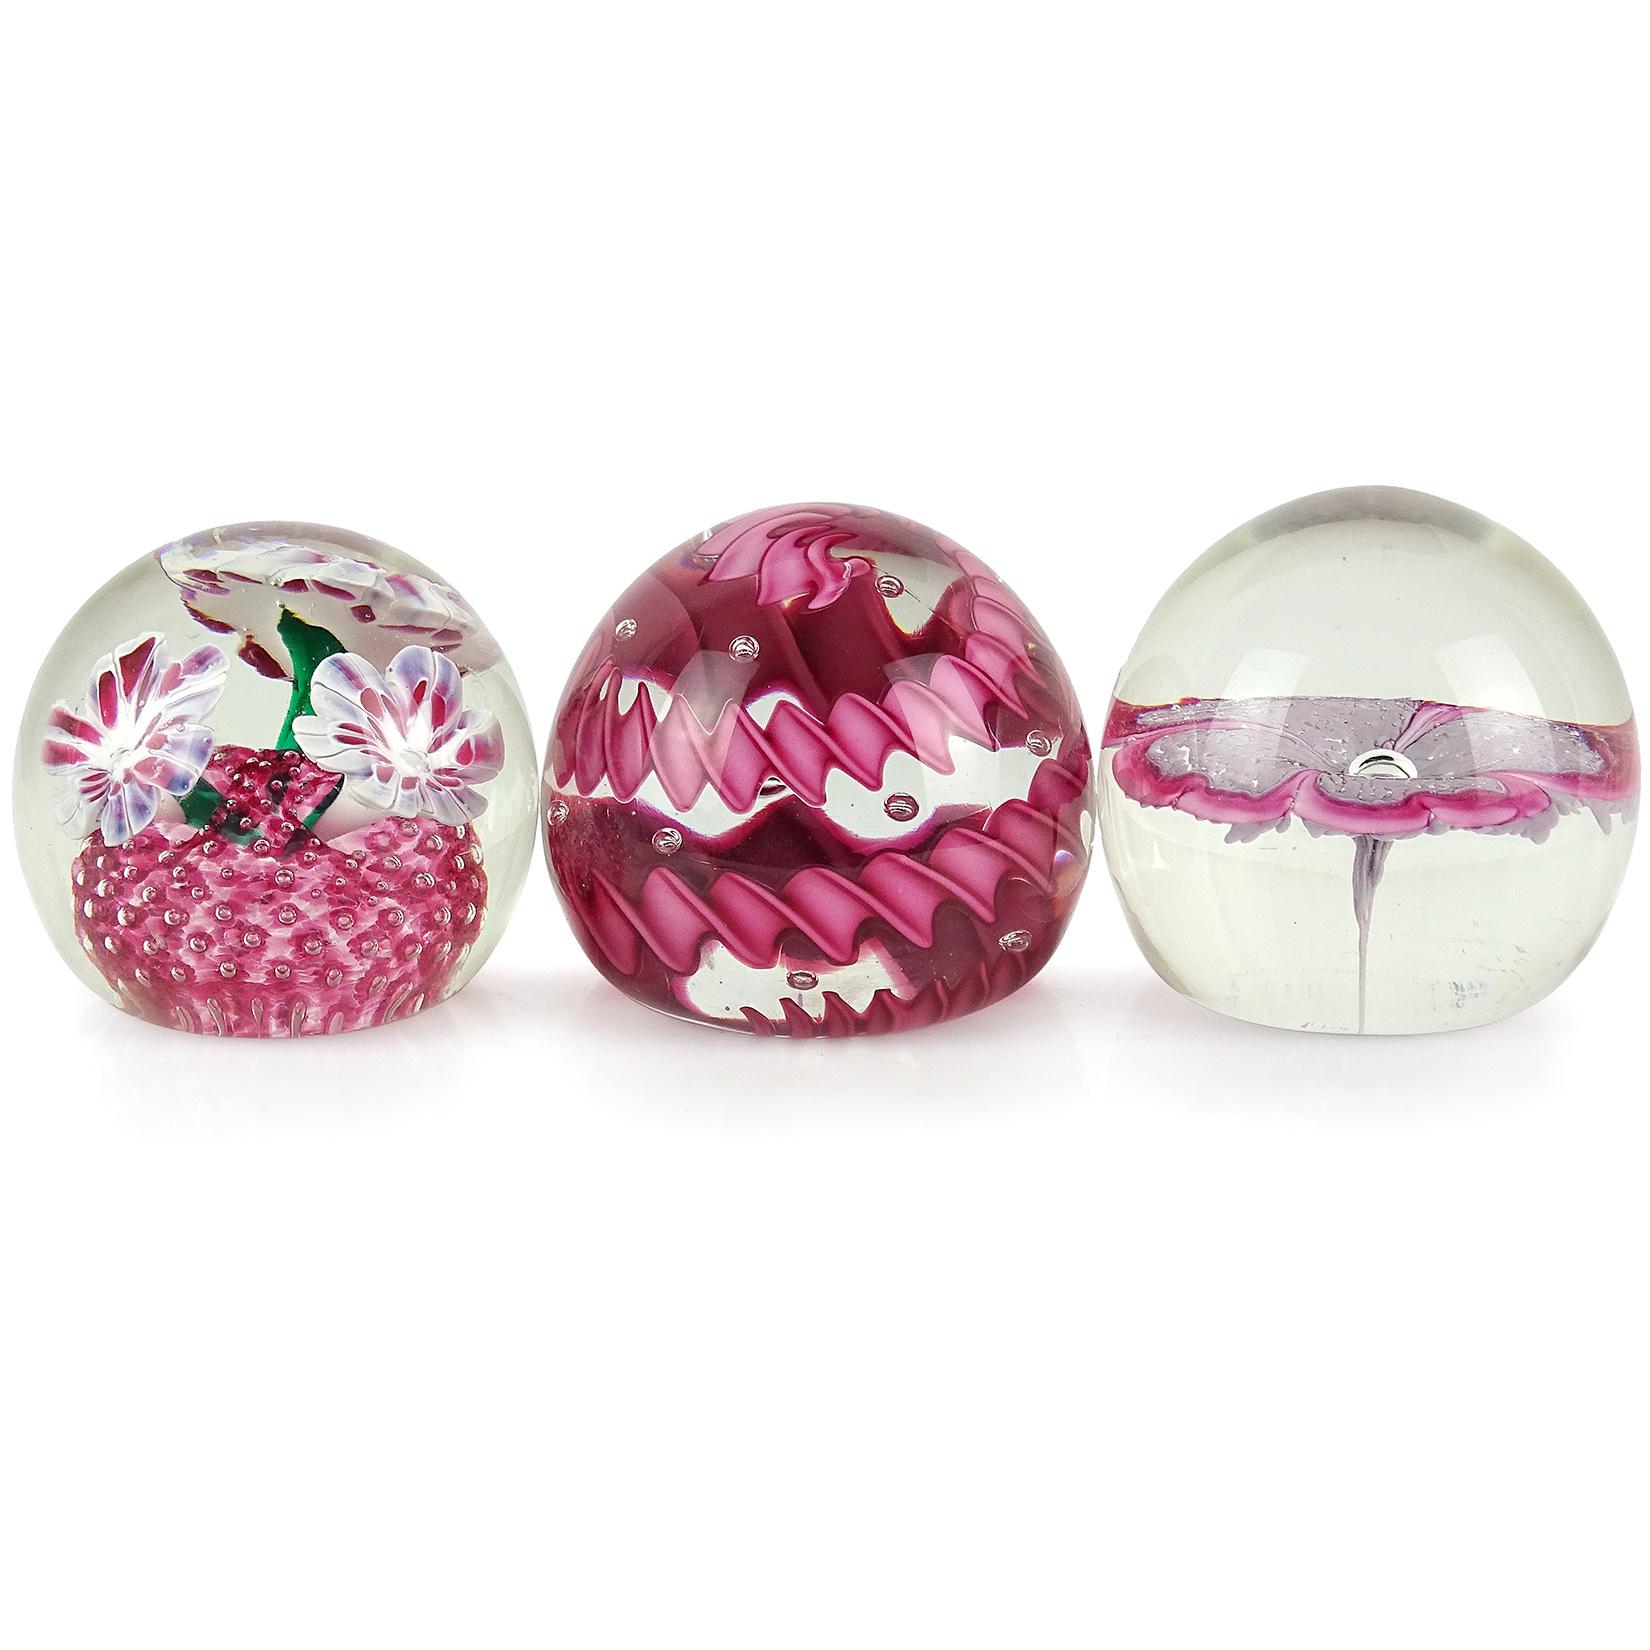 Priced per item. Beautiful Murano hand blown Italian art glass paperweights. Documented to the Fratelli Toso company. The first is a deep pink twisted ribbon paperweight, with bubbles in clear glass. Next, a floating lavender flower, with pink edge